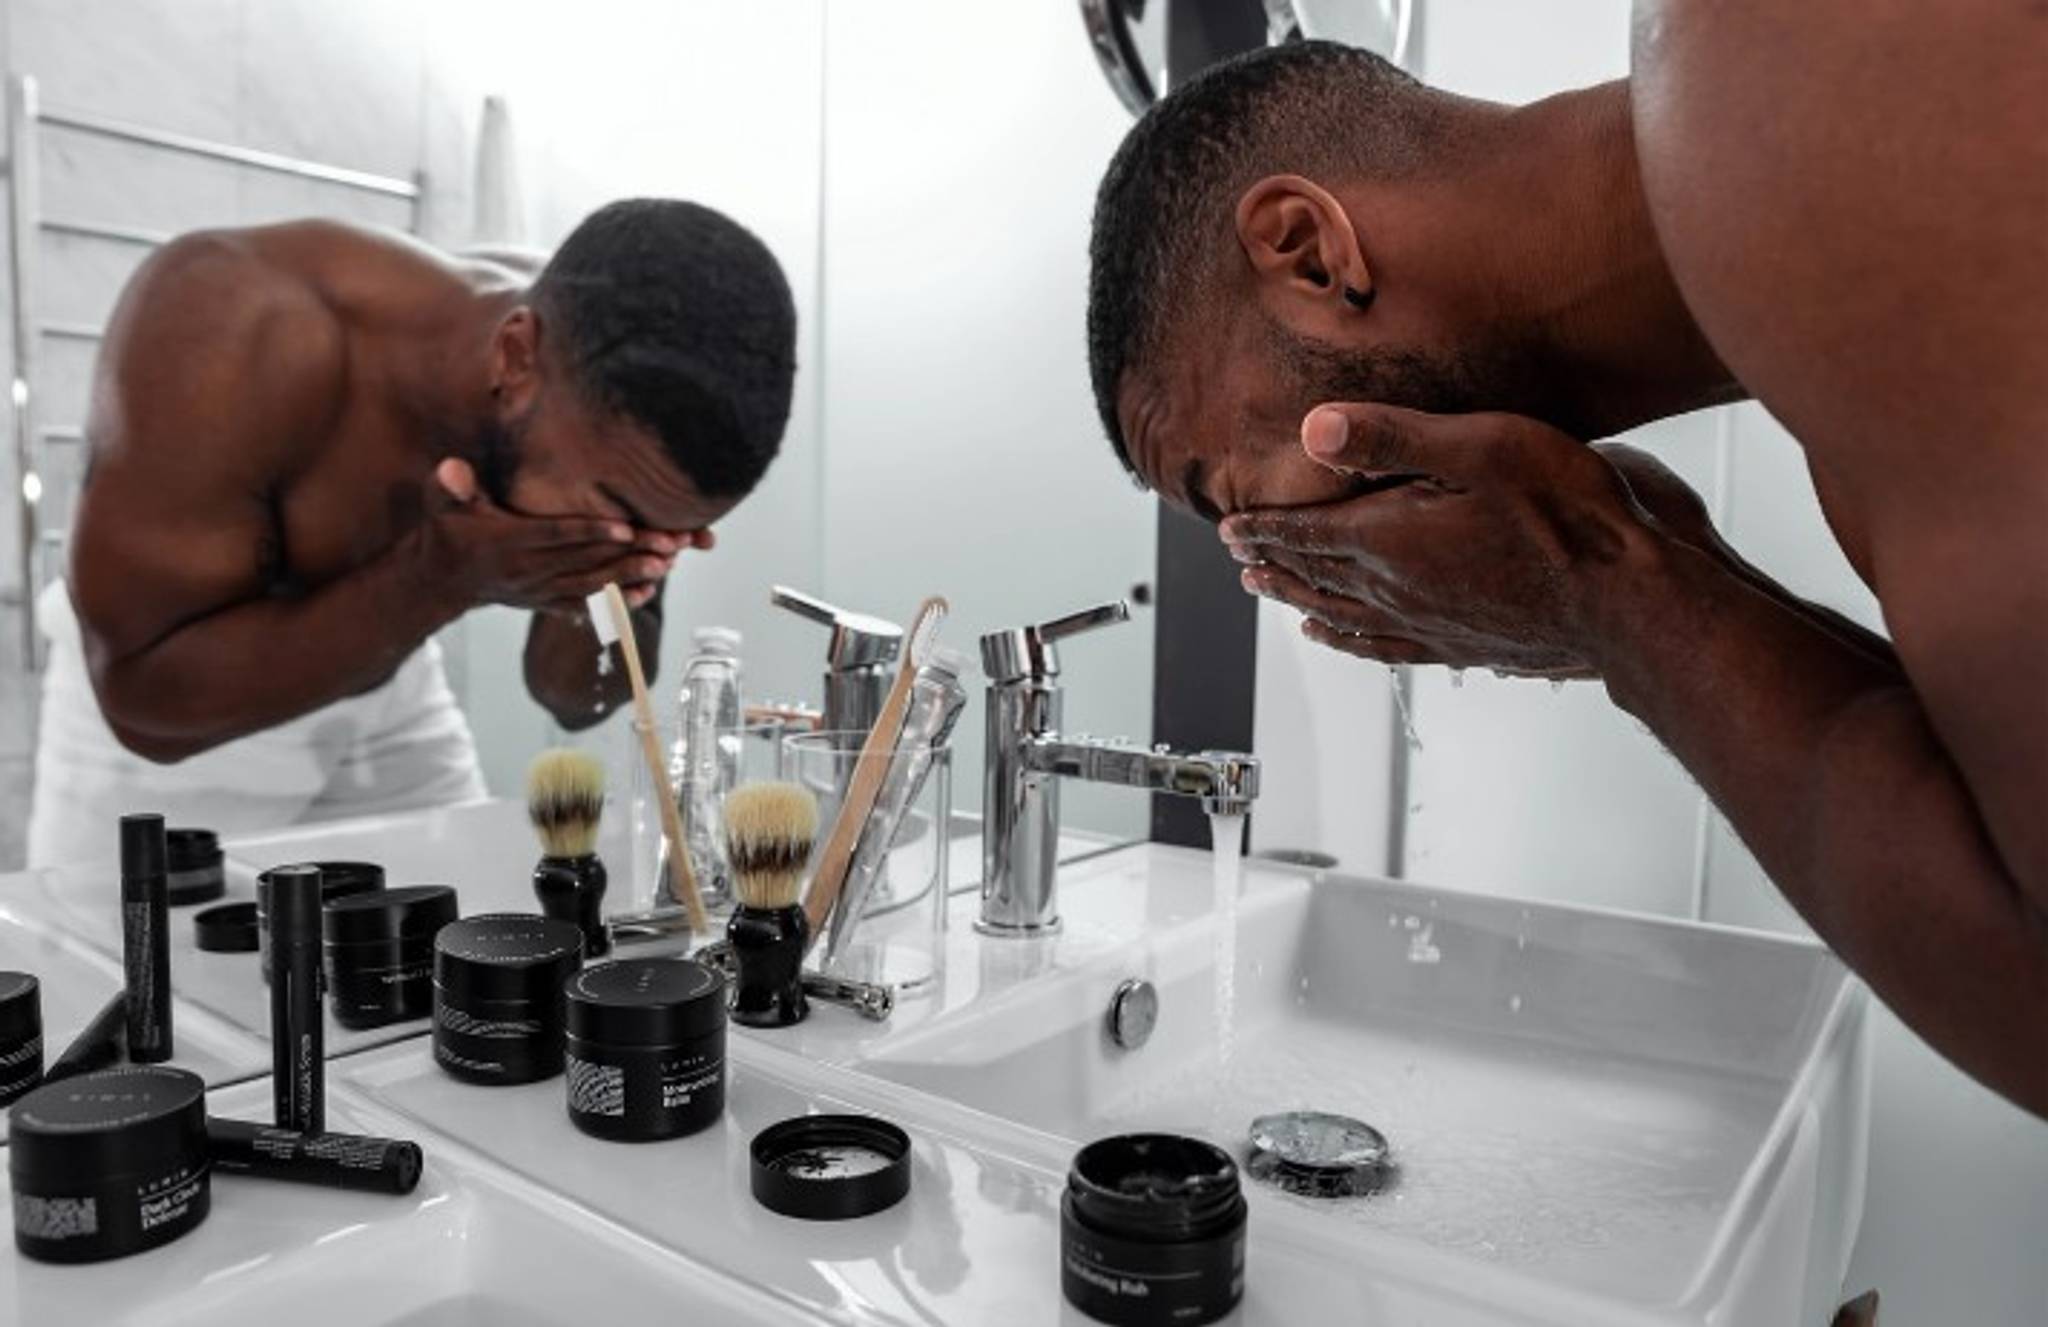 Men want more tailored beauty from brands